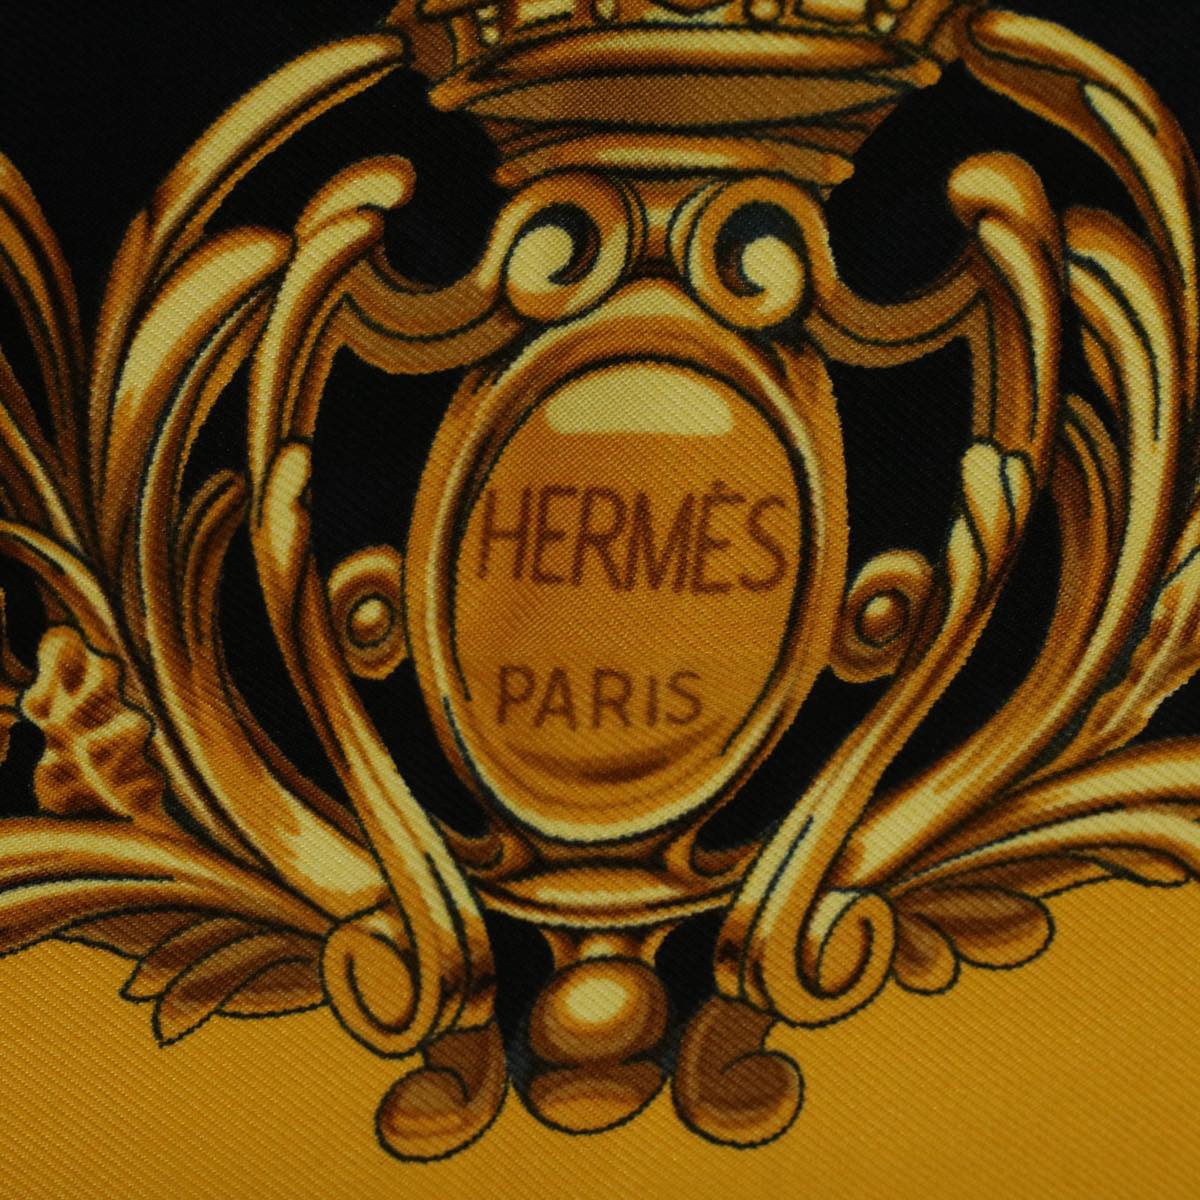 HERMES Carre 90 Carrolses Scarf Silk Black Yellow Auth 57817